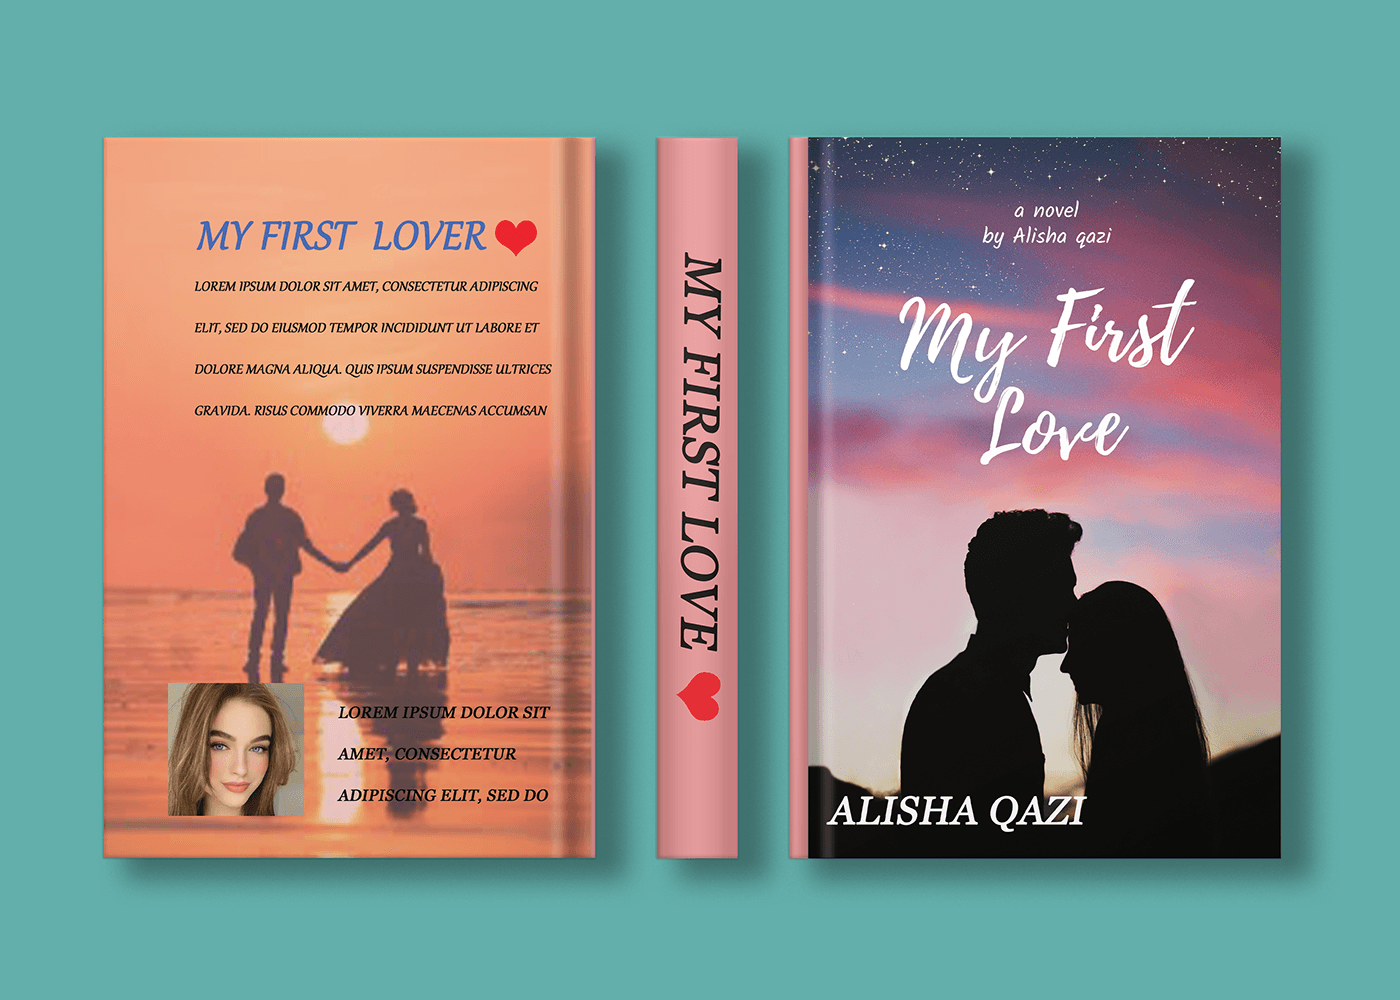 "First Love: A journey of the heart 💖 